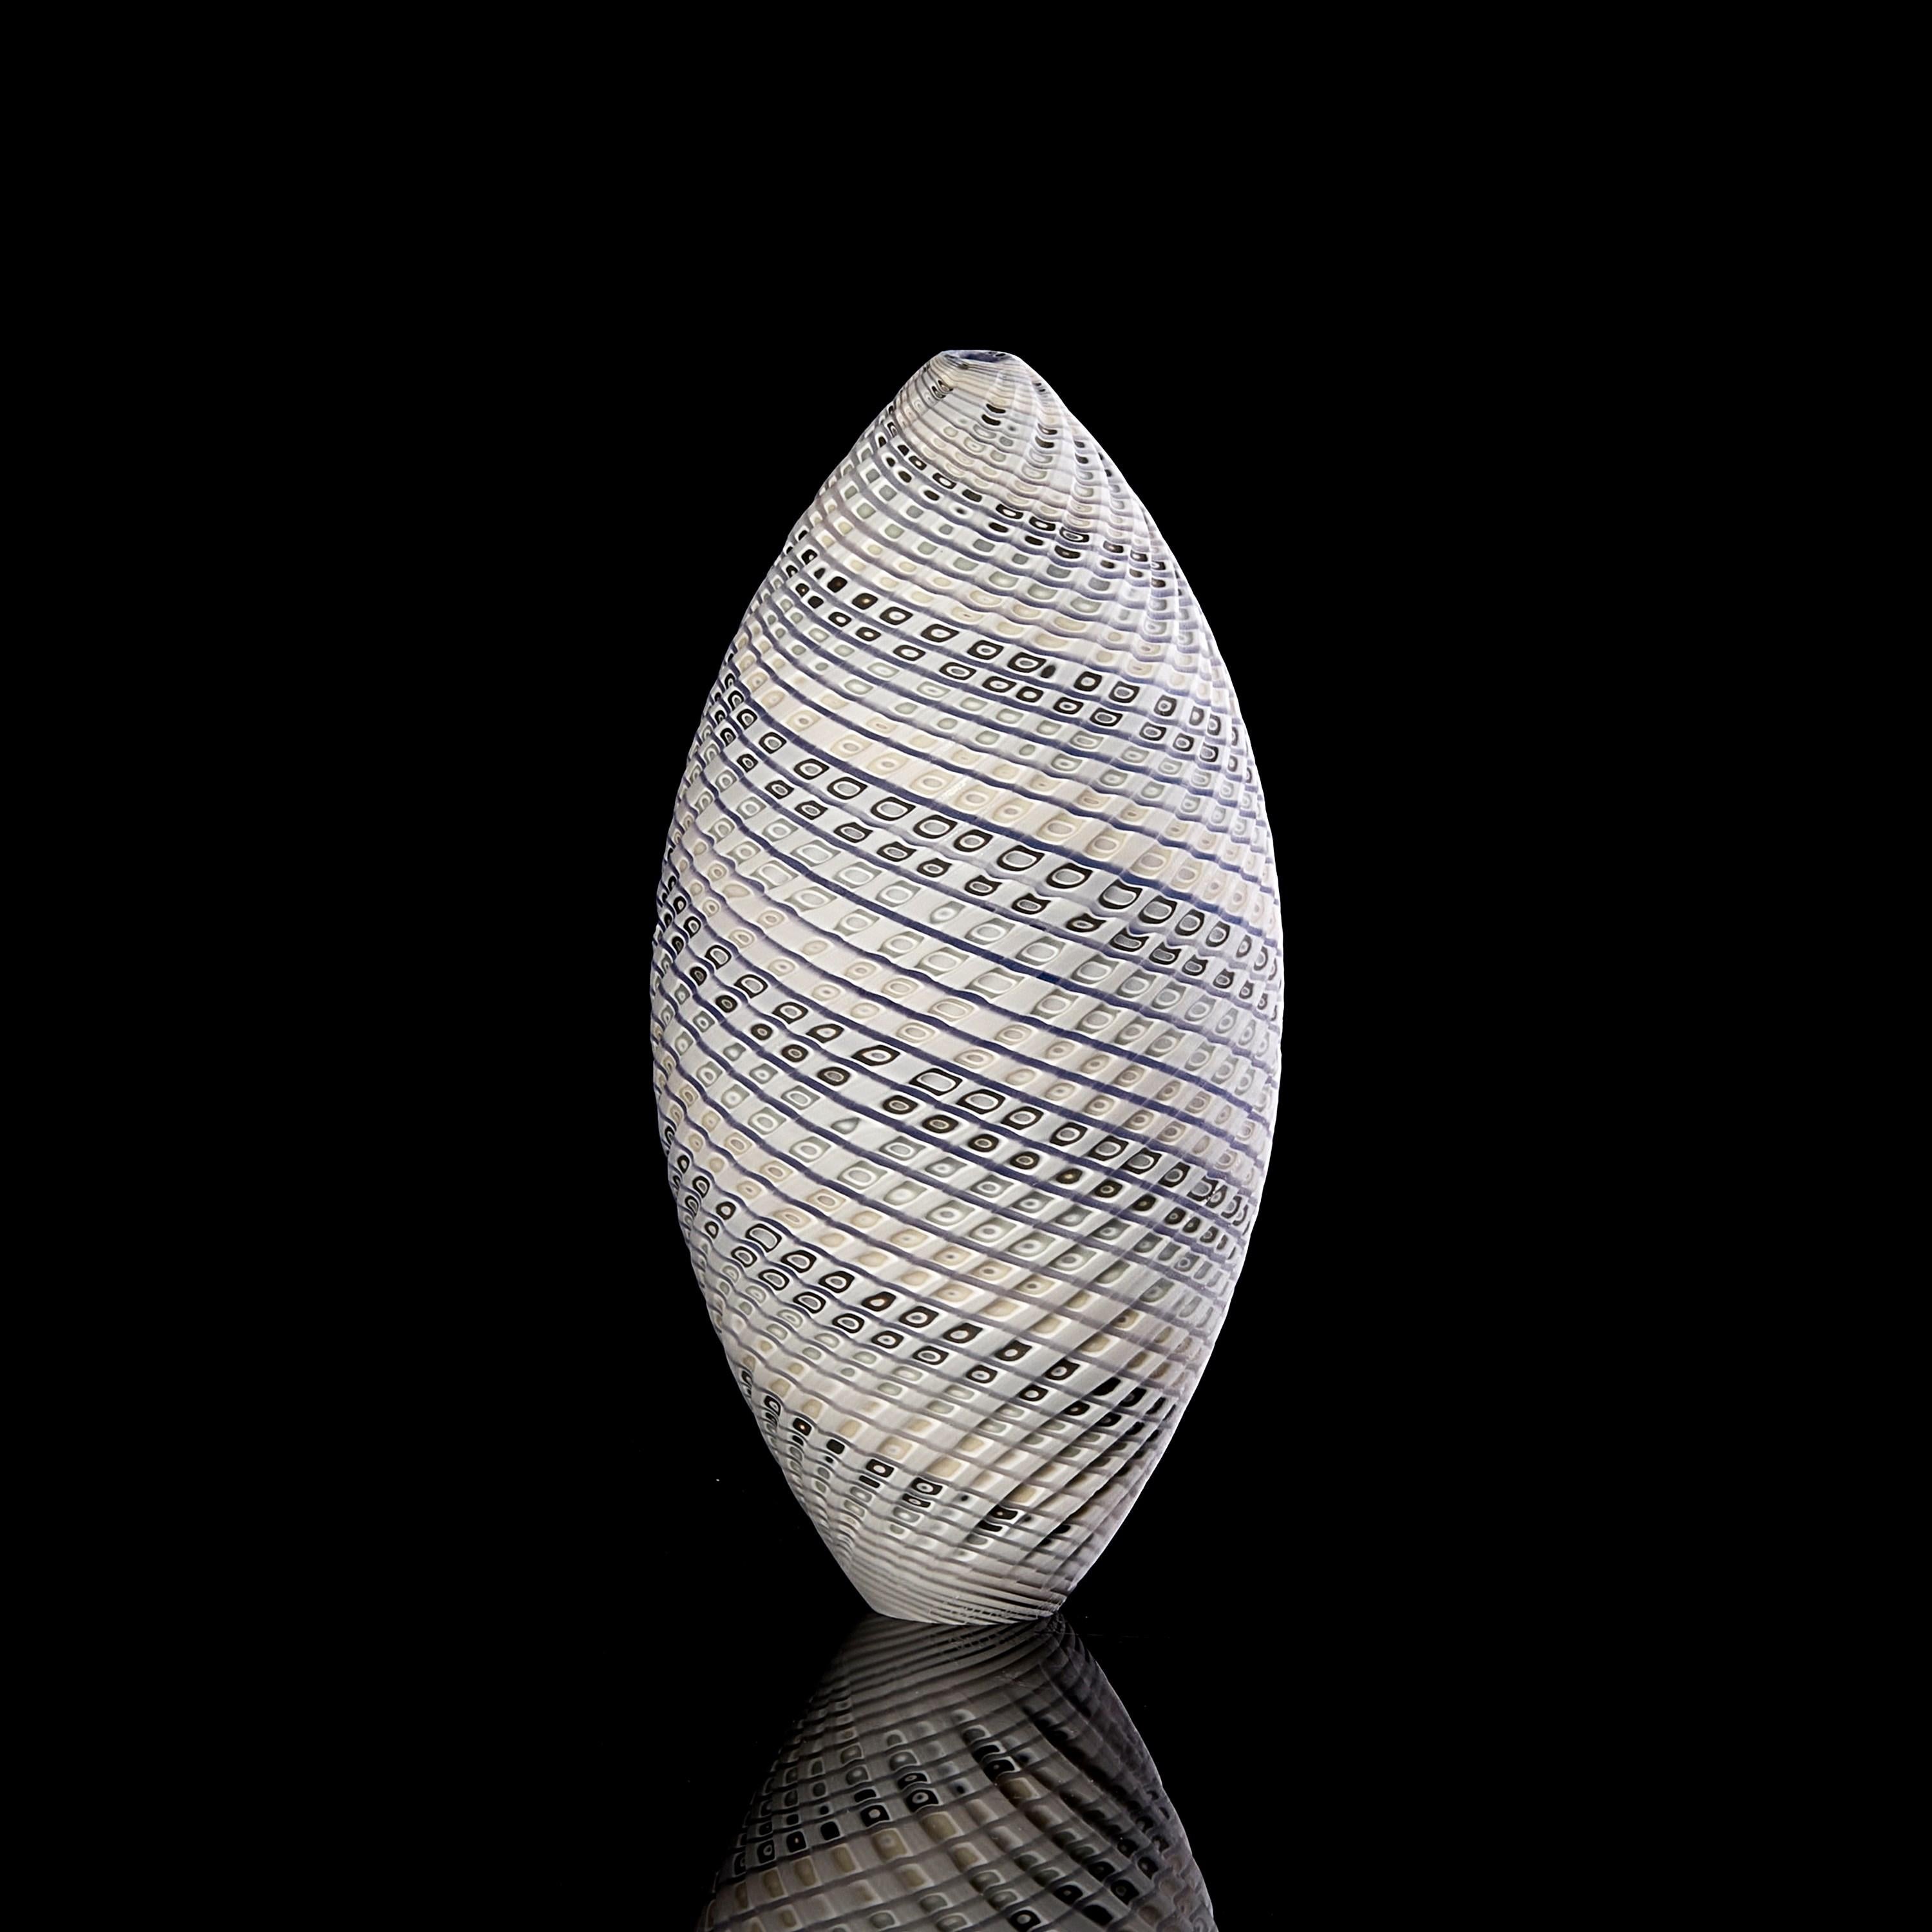 Woven Three Tone Blue Ovoid (sm), textured handblown glass vessel by Layne Rowe In New Condition For Sale In London, GB